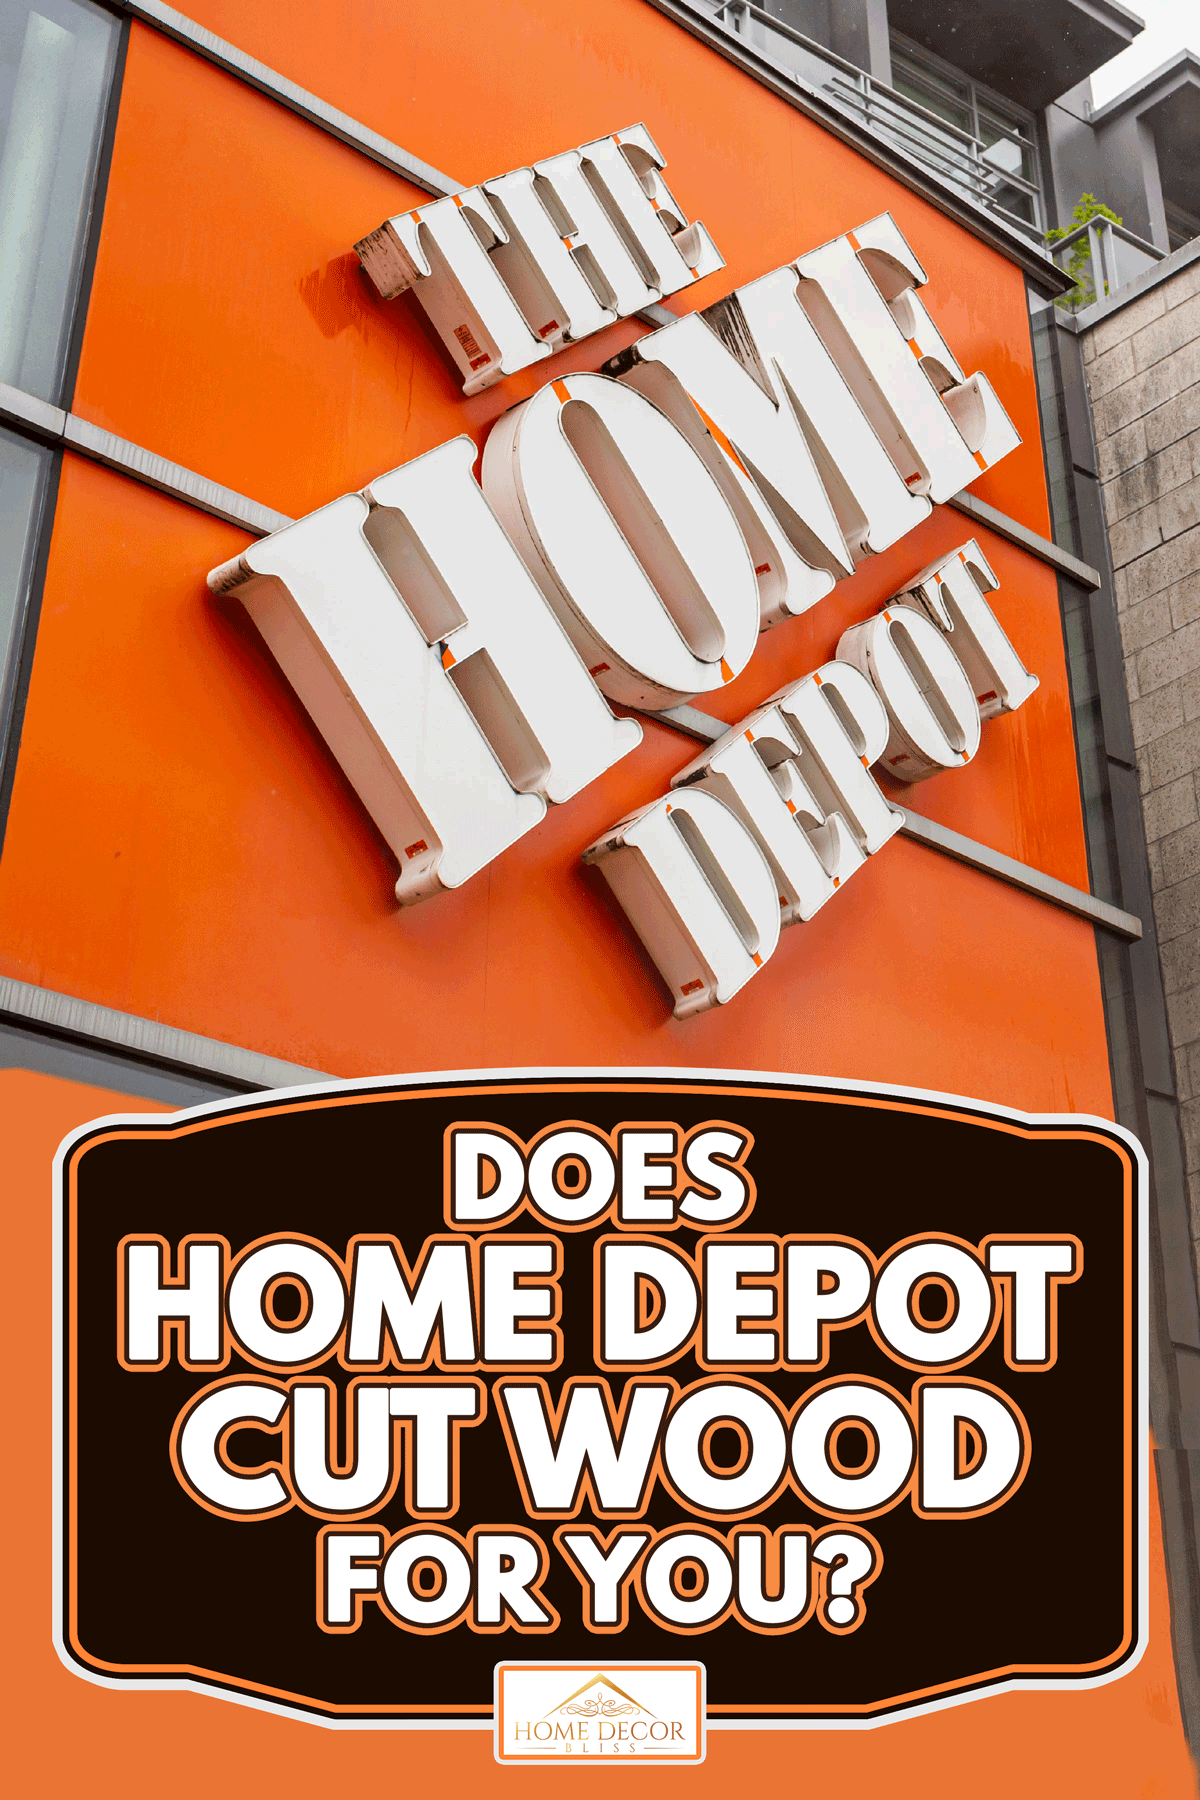 American hardware giant The Home Depot store logo in front of the building, Does Home Depot Cut Wood For You?